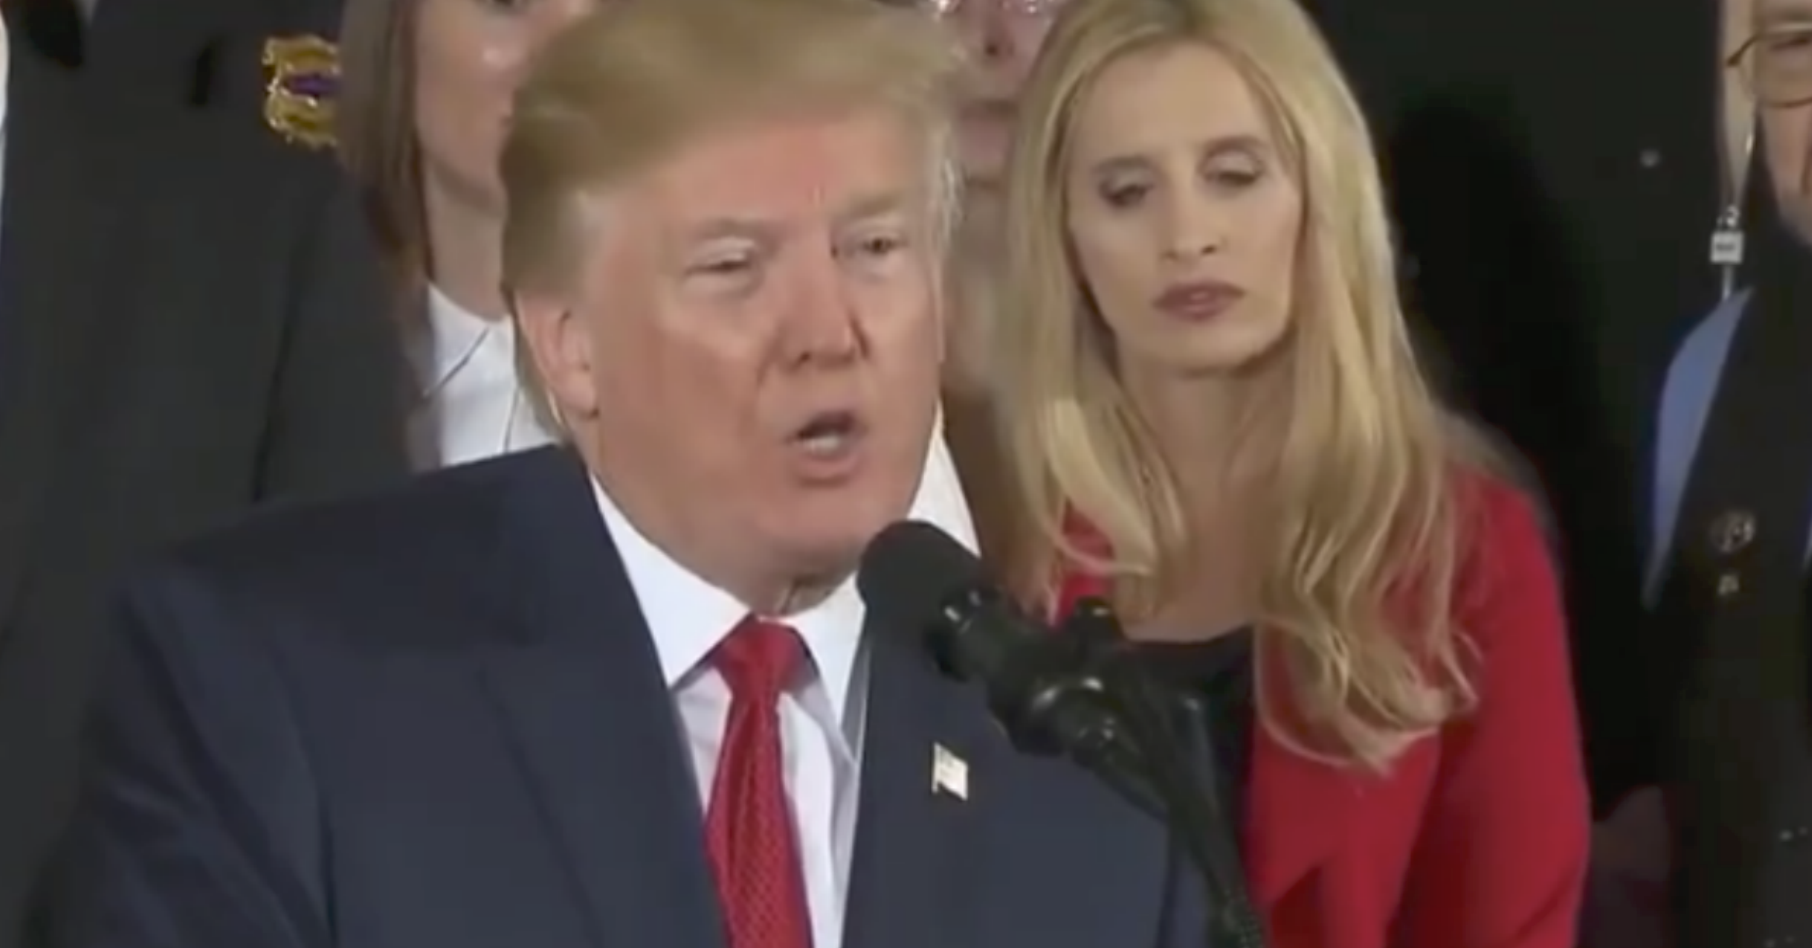 Trump Invokes Brother's 'Tough Life' With Alcoholism During Speech on Opioid Crisis